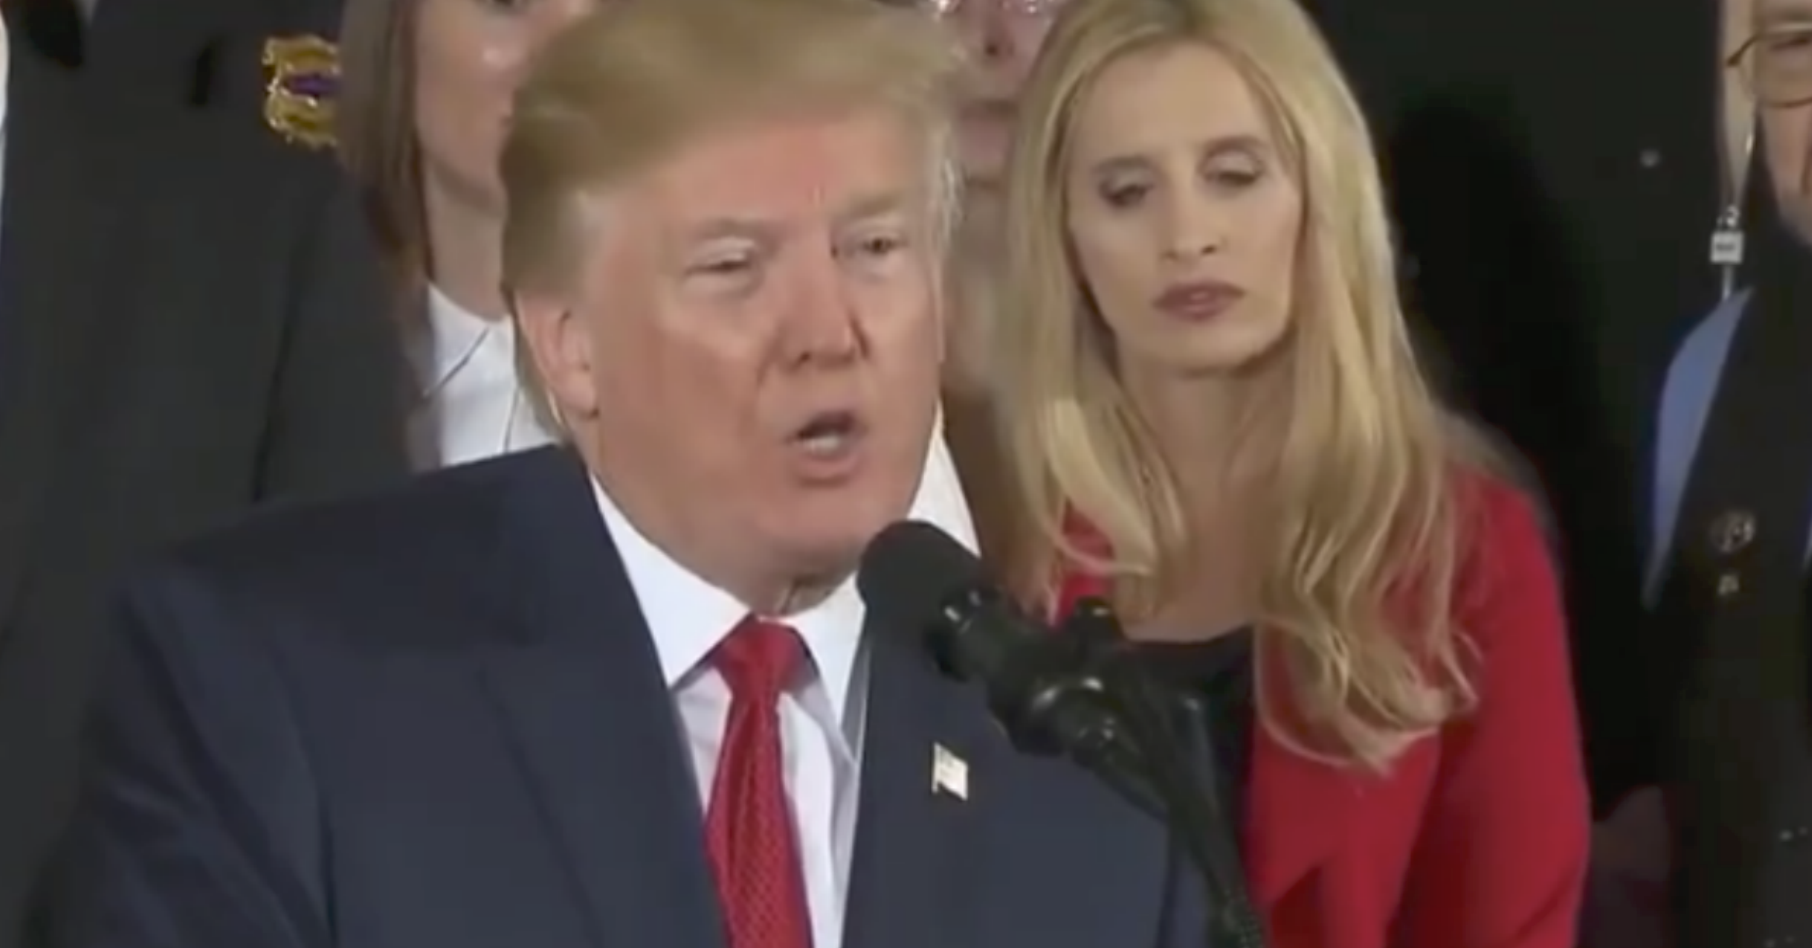 Trump Invokes Brother's 'Tough Life' With Alcoholism During Speech on Opioid Crisis